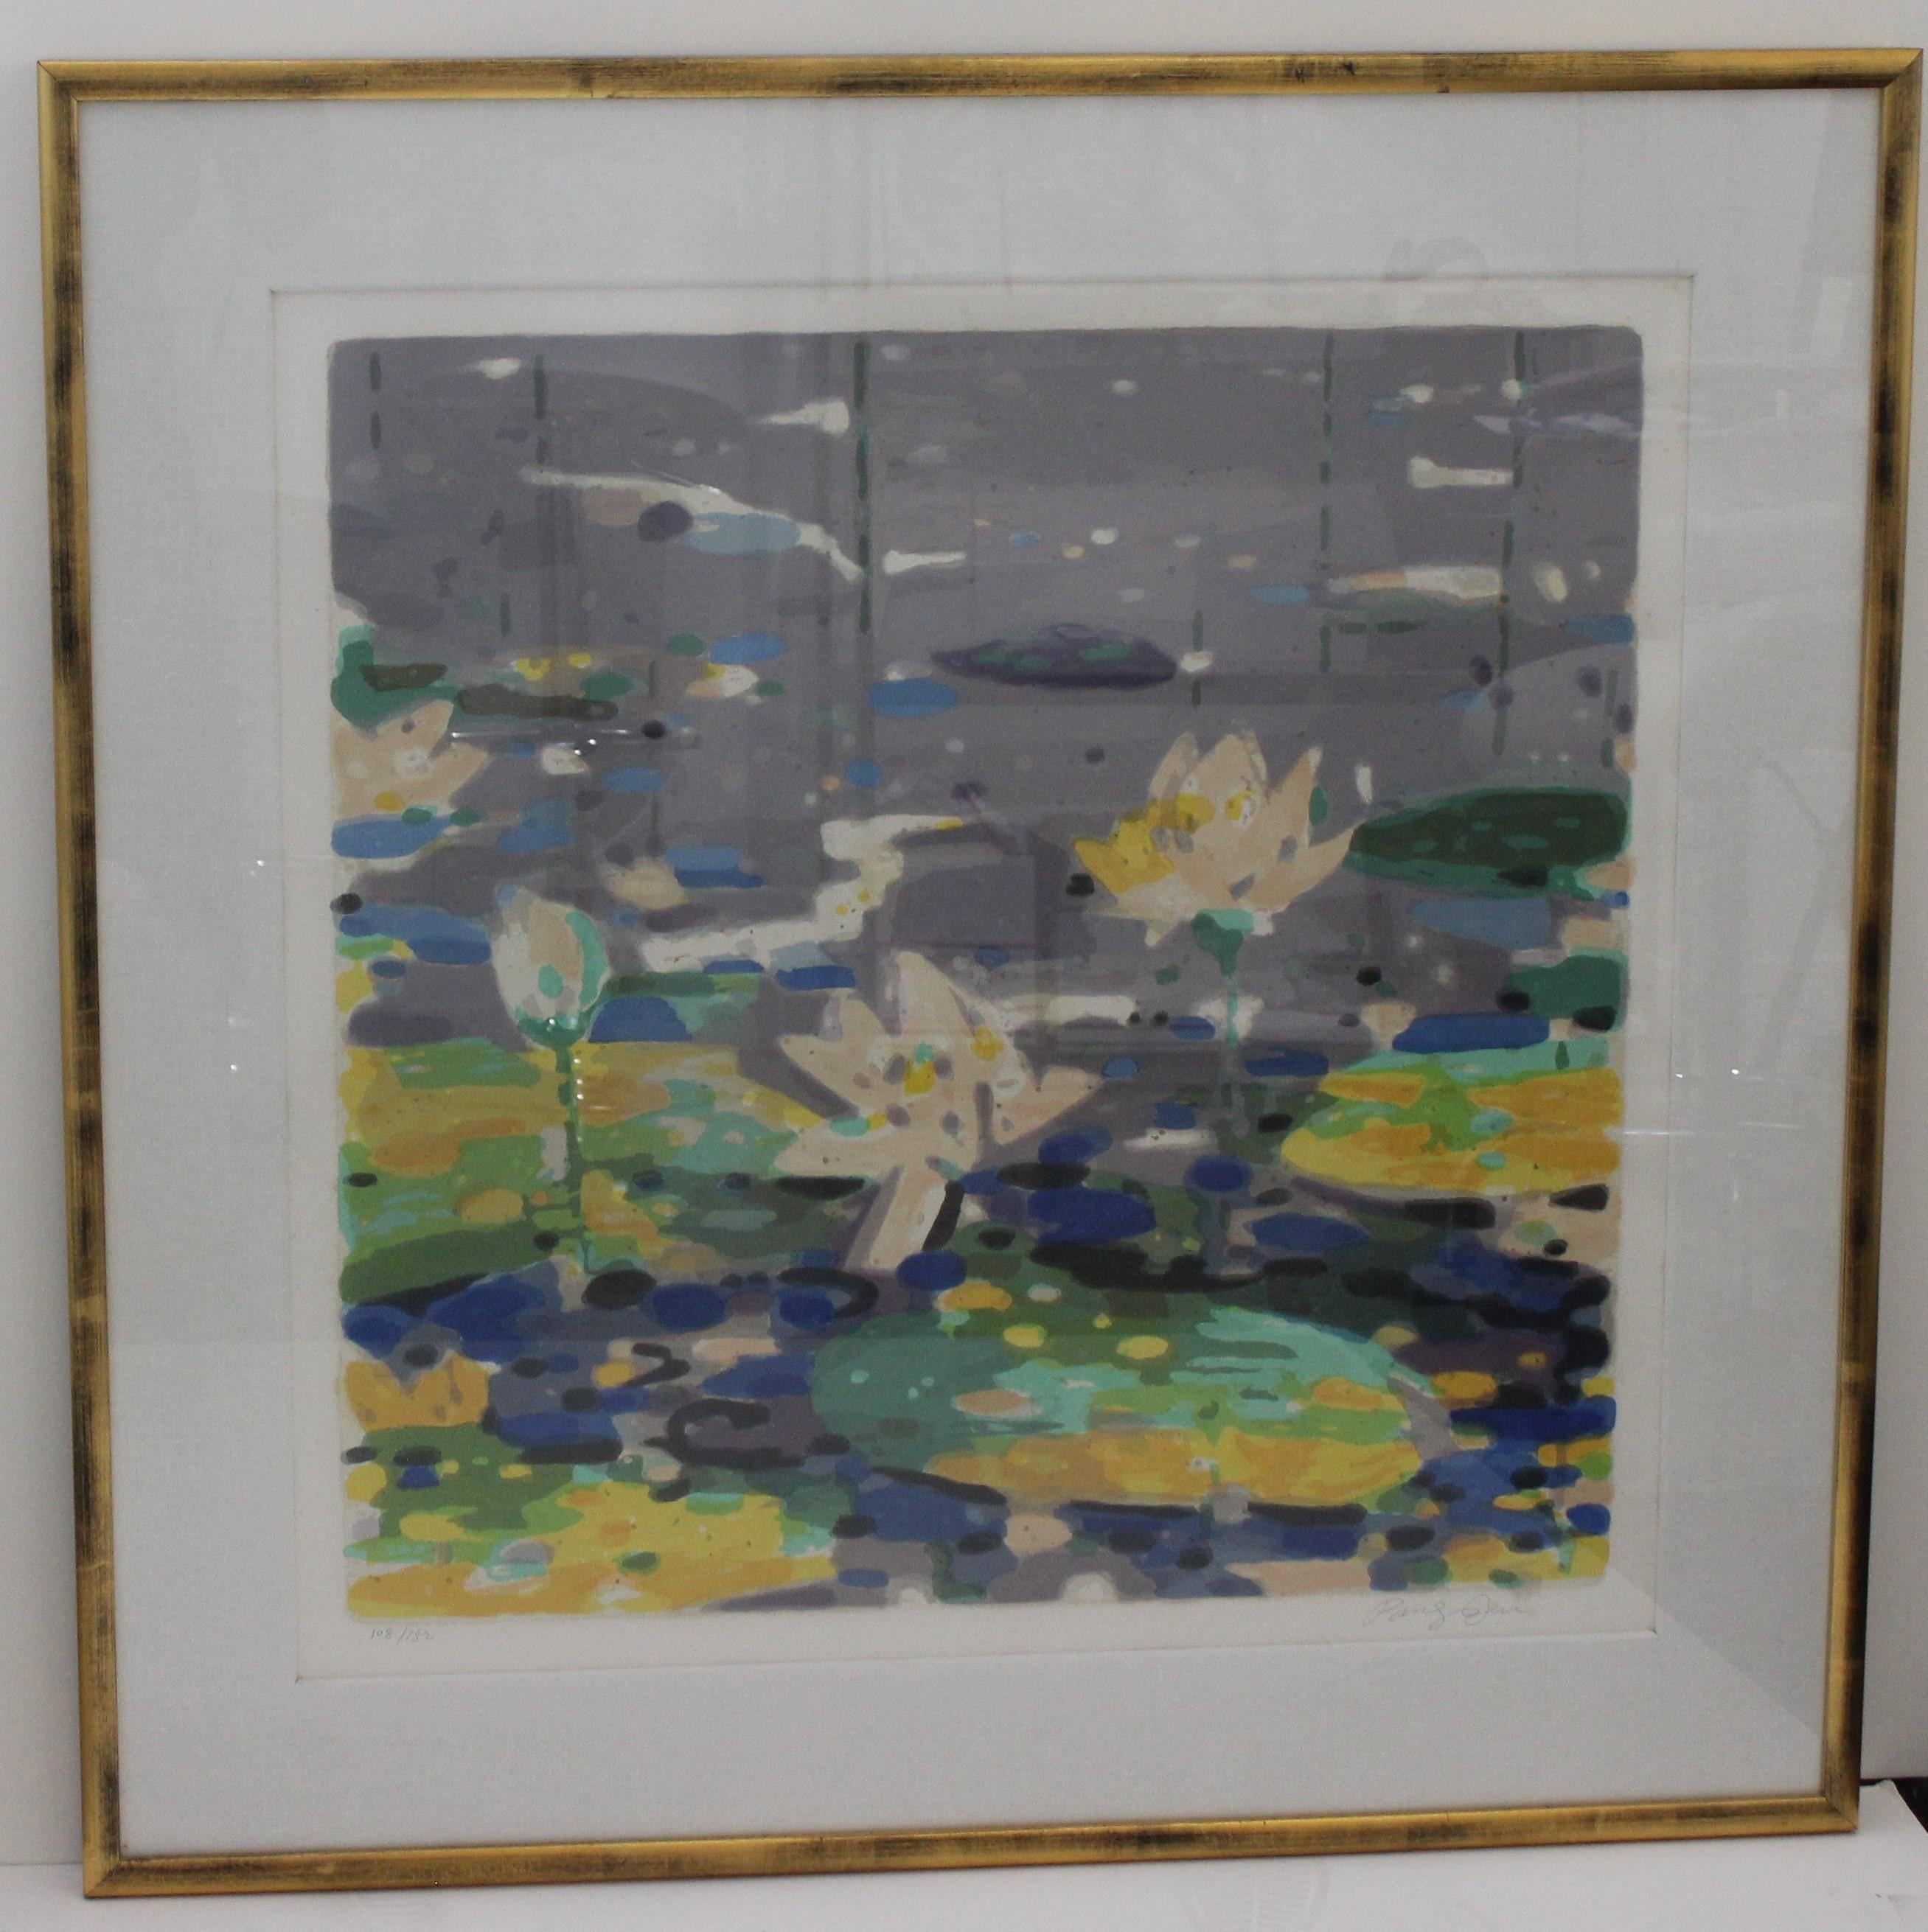 Lilypond Serigraph by Pang Jen from a Palm Beach estate. Beautifully archival framing with linen mat. Limited edition #108 of 152. Signed by the artist.

Frame size is 36